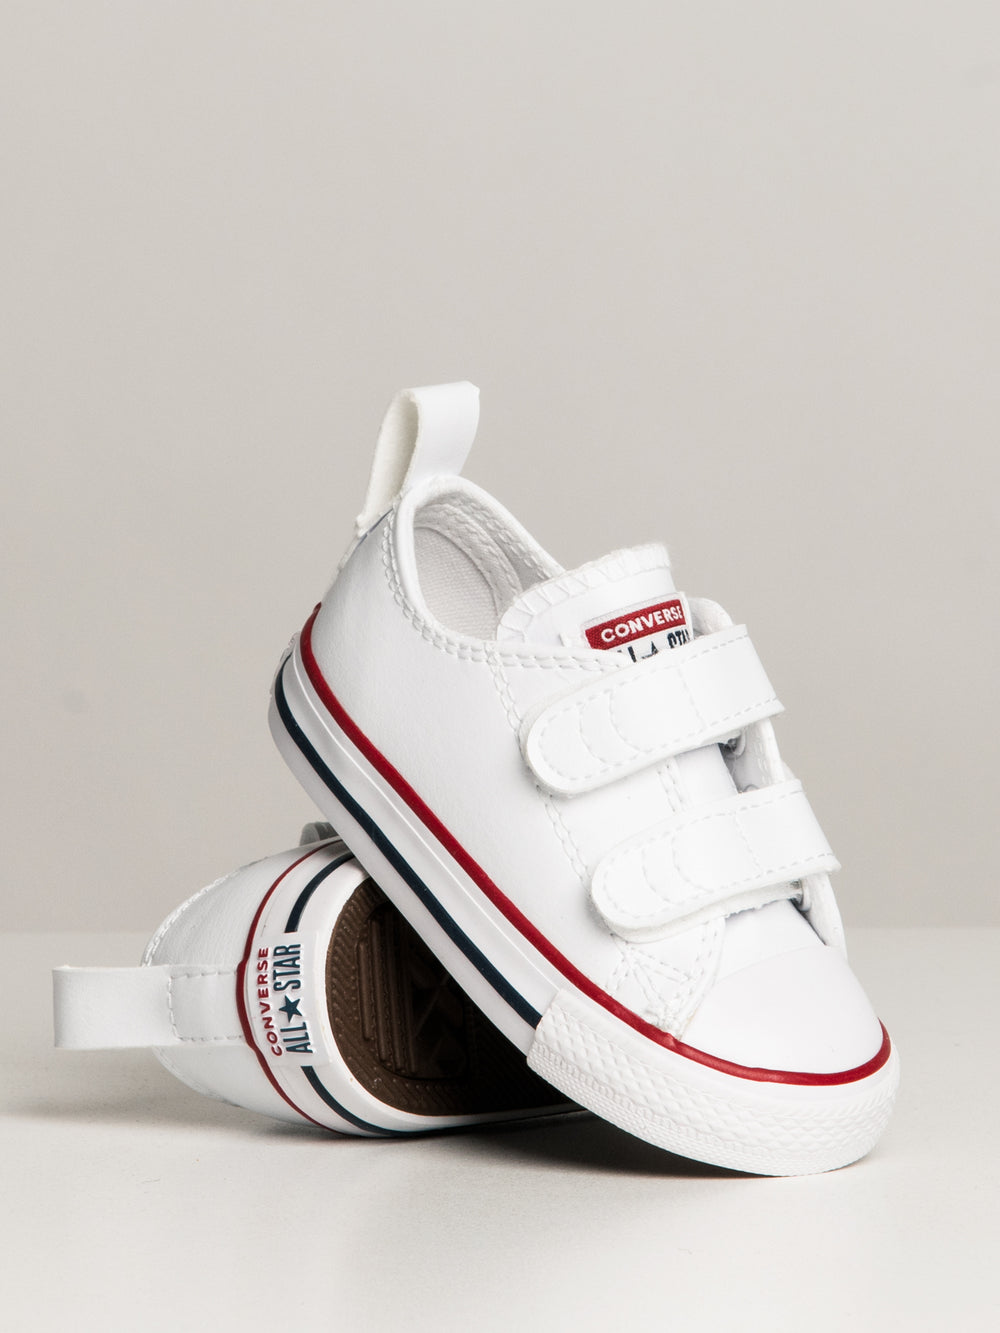 CONVERSE TODDLER CTAS CLASSIC 2V OX - CLEARANCE